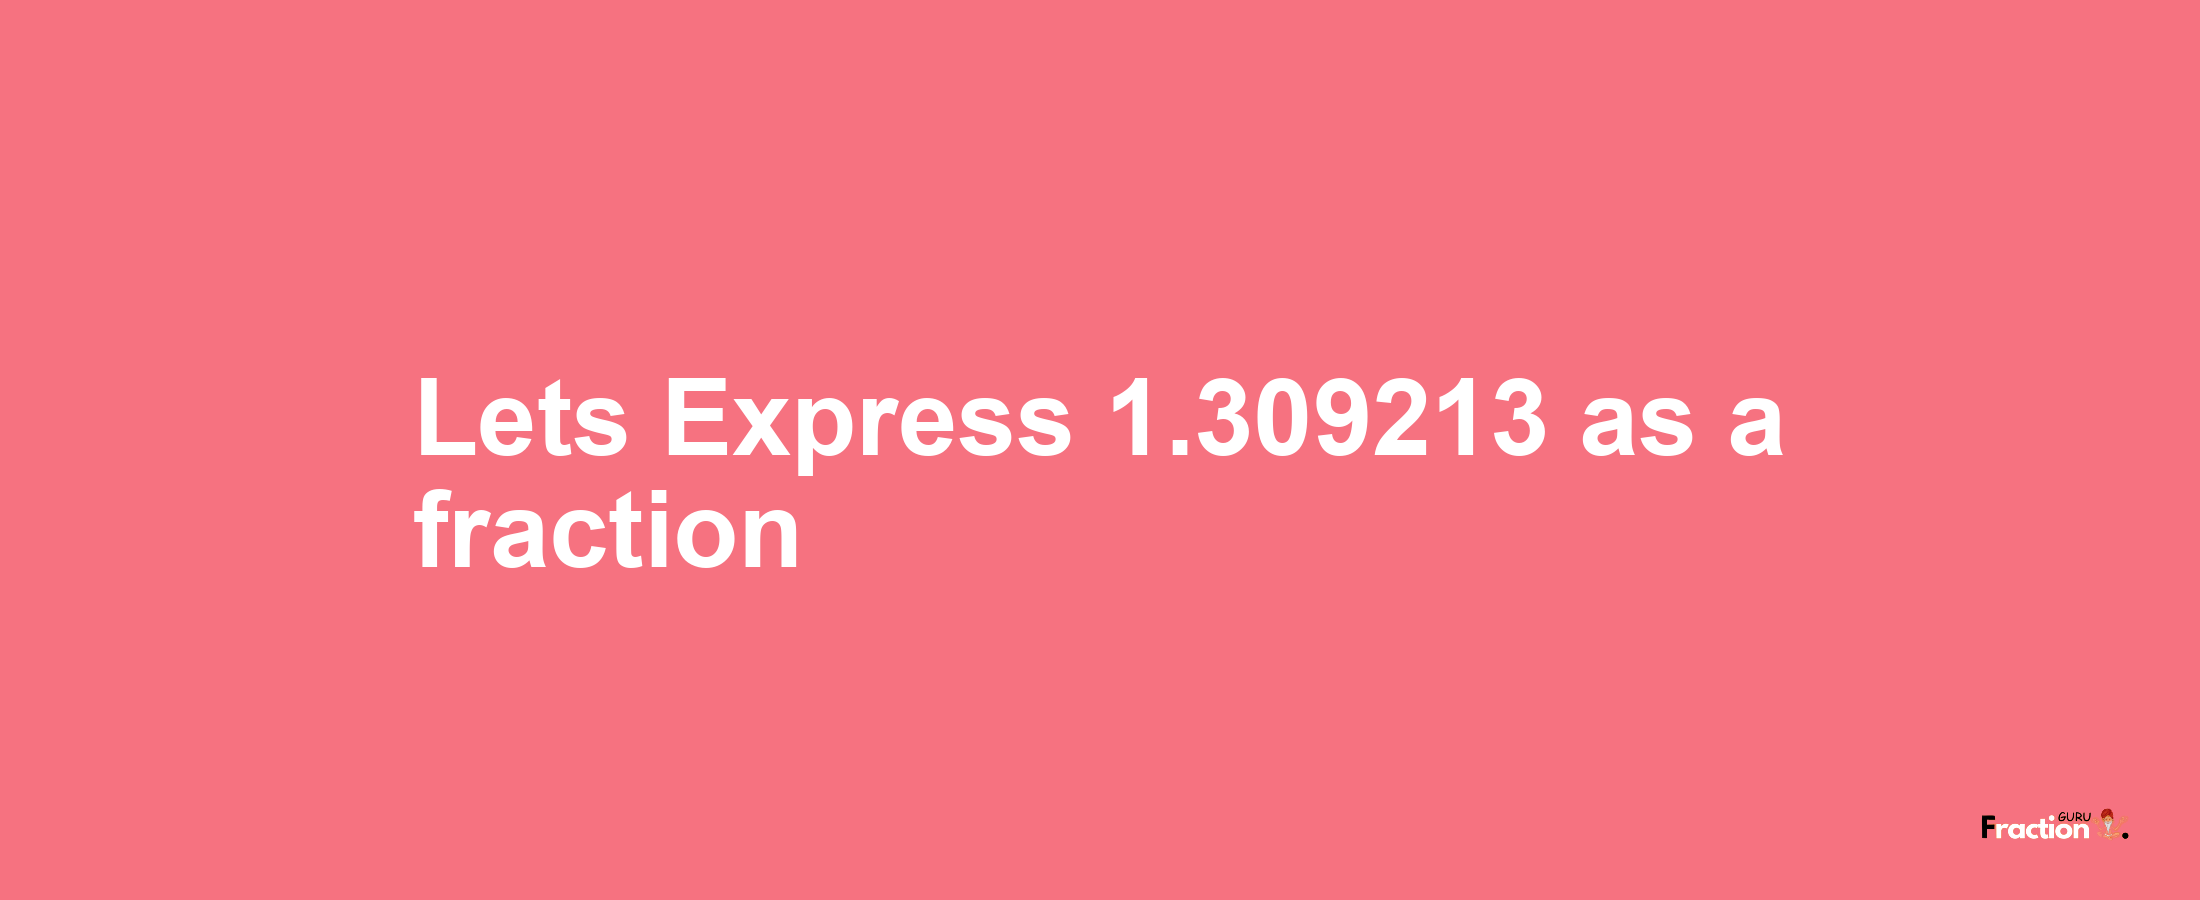 Lets Express 1.309213 as afraction